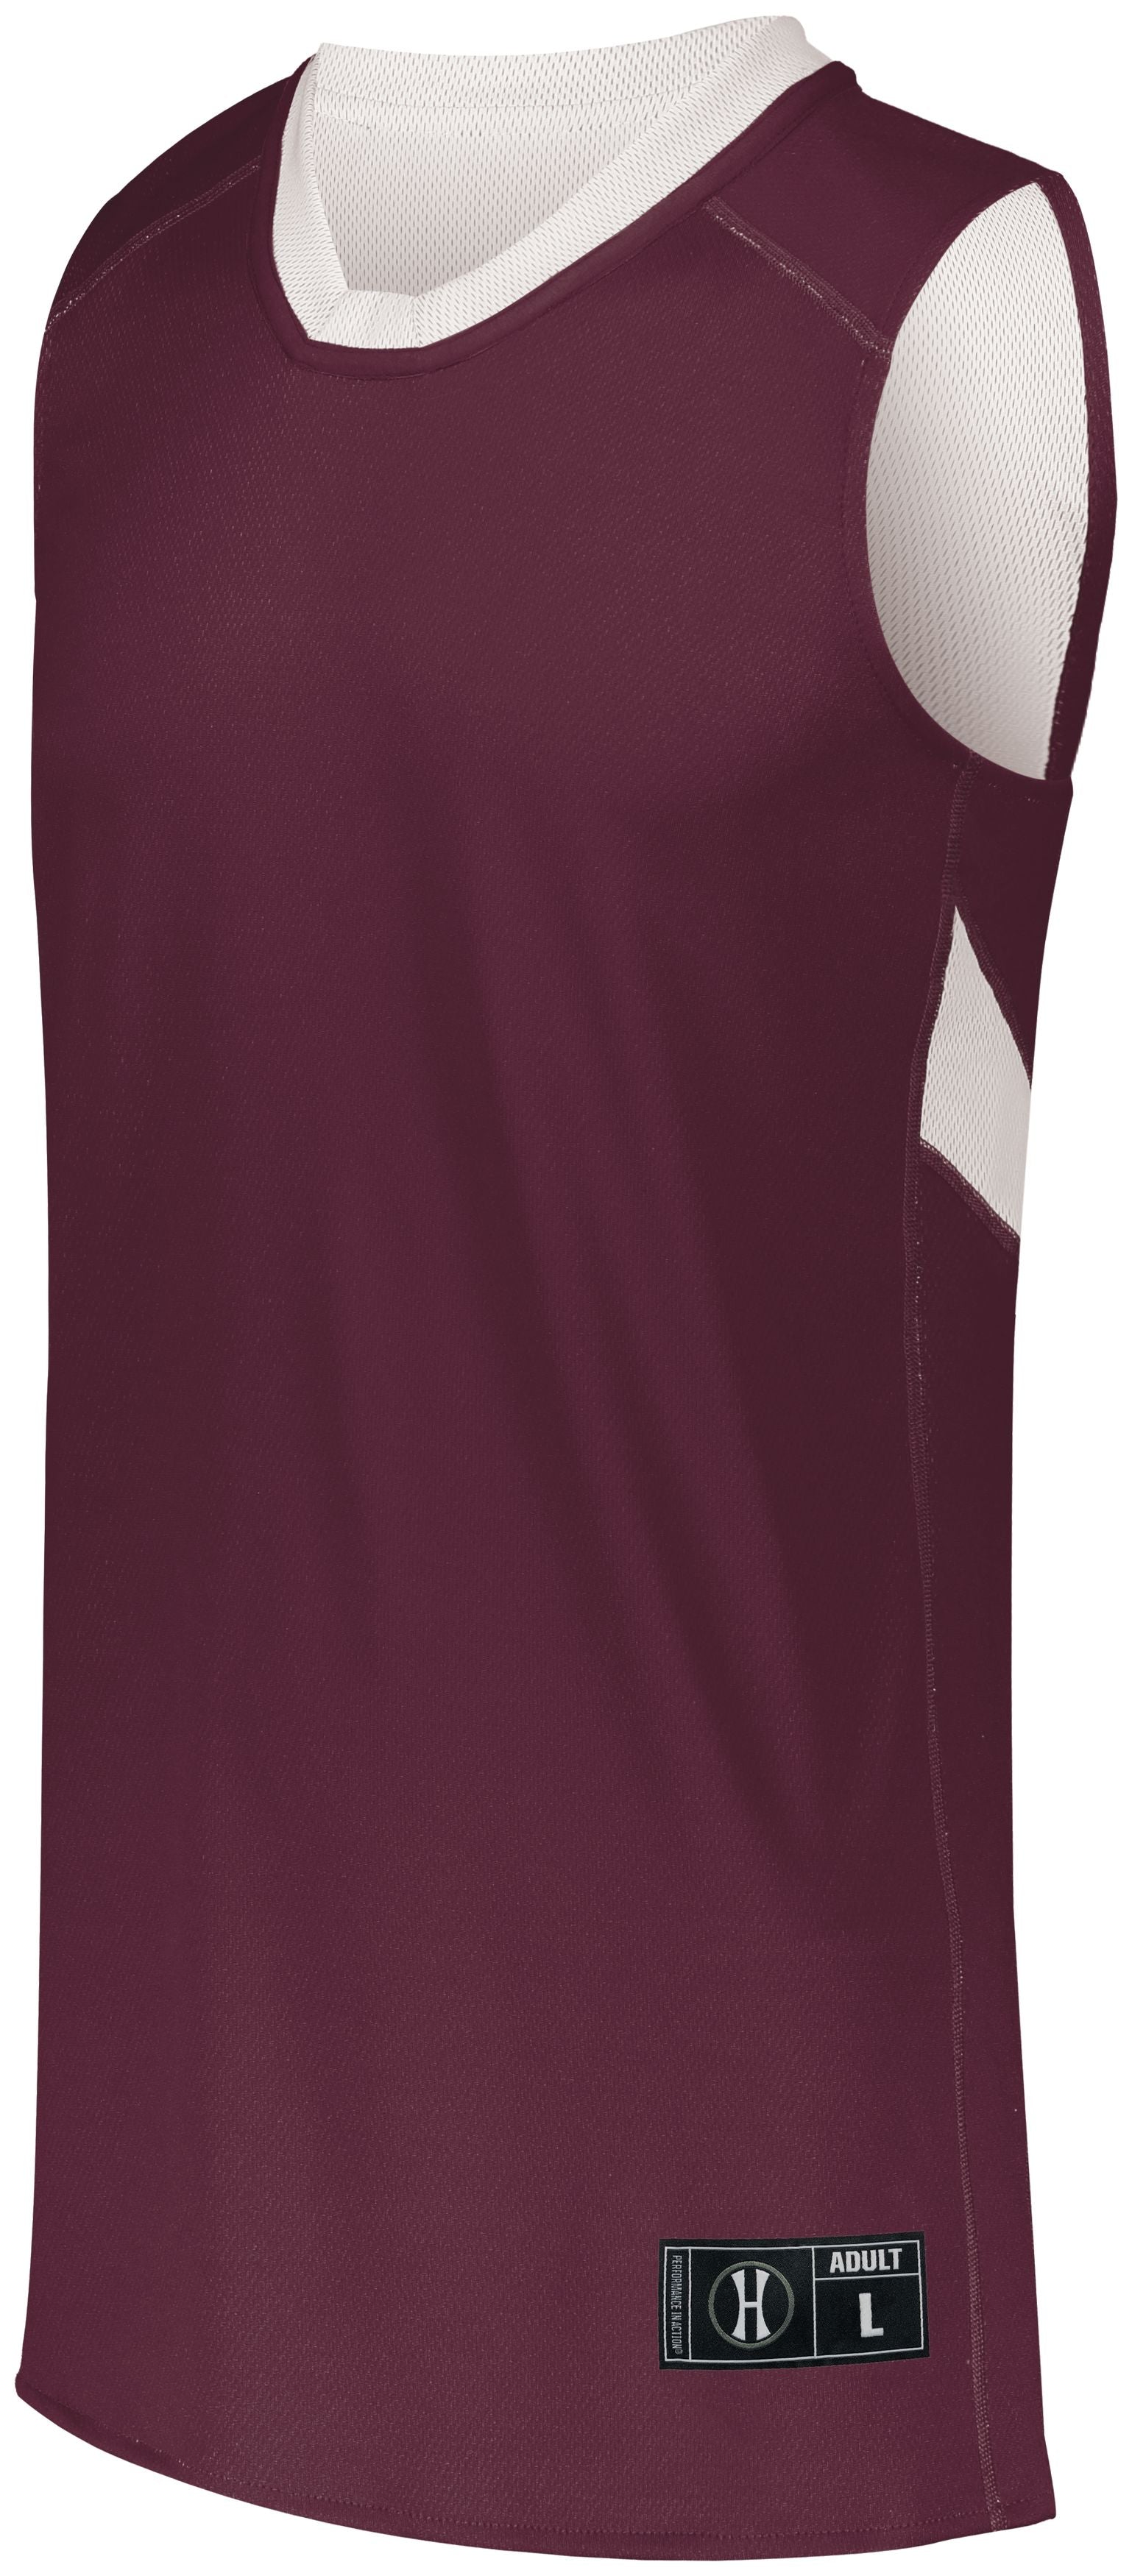 Holloway Youth Dual-Side Single Ply Basketball Jersey in Maroon/White  -Part of the Youth, Youth-Jersey, Basketball, Holloway, Shirts, All-Sports, All-Sports-1 product lines at KanaleyCreations.com